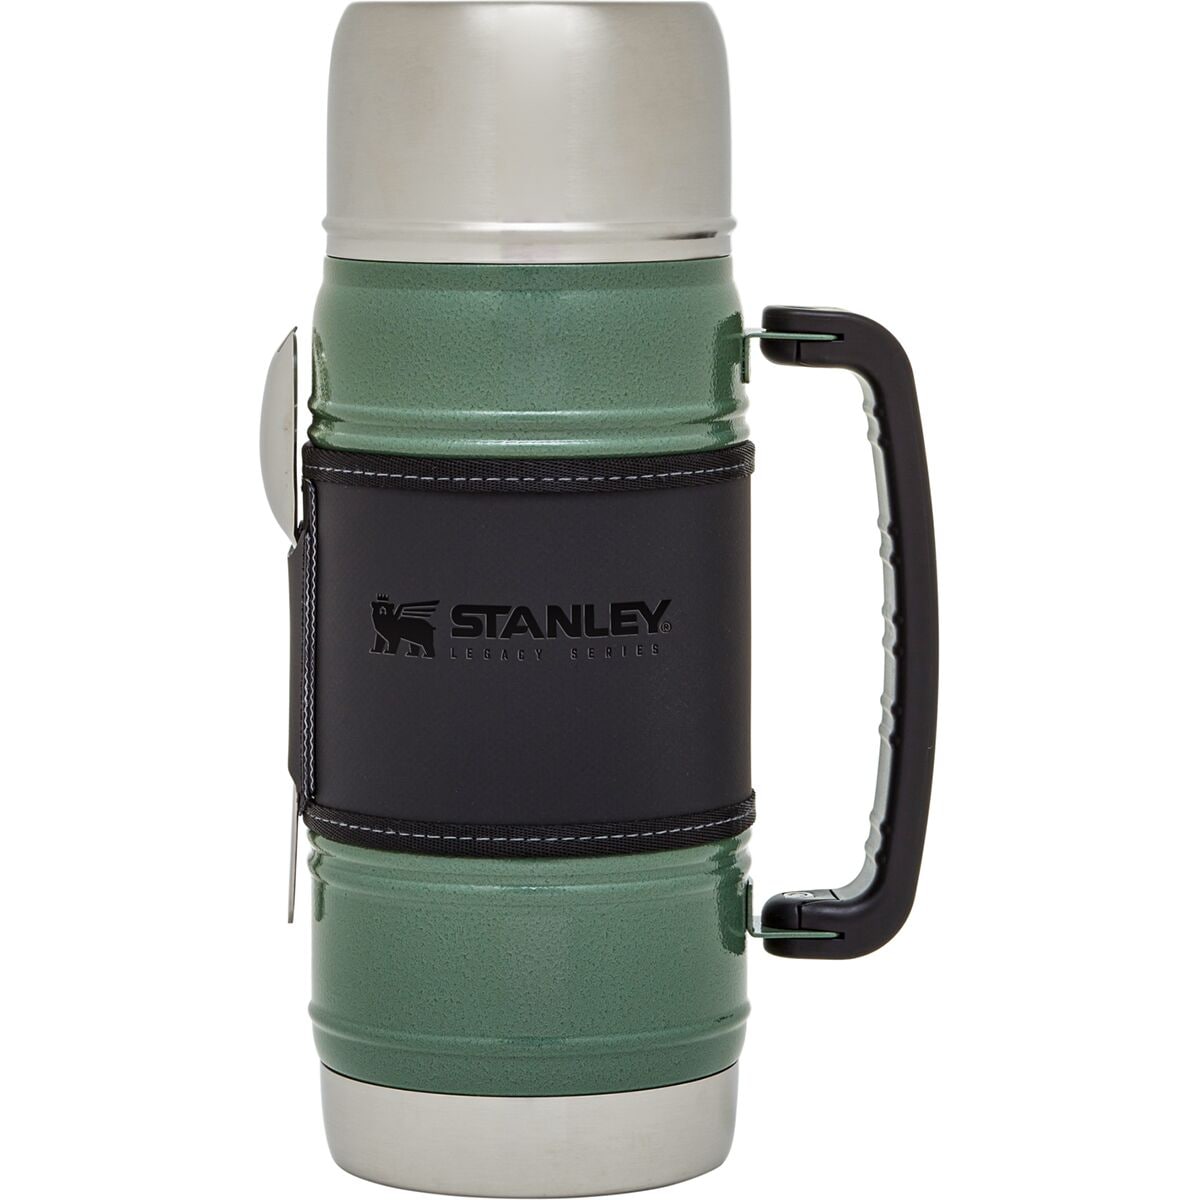 Stanley all in one Food Jar Review 